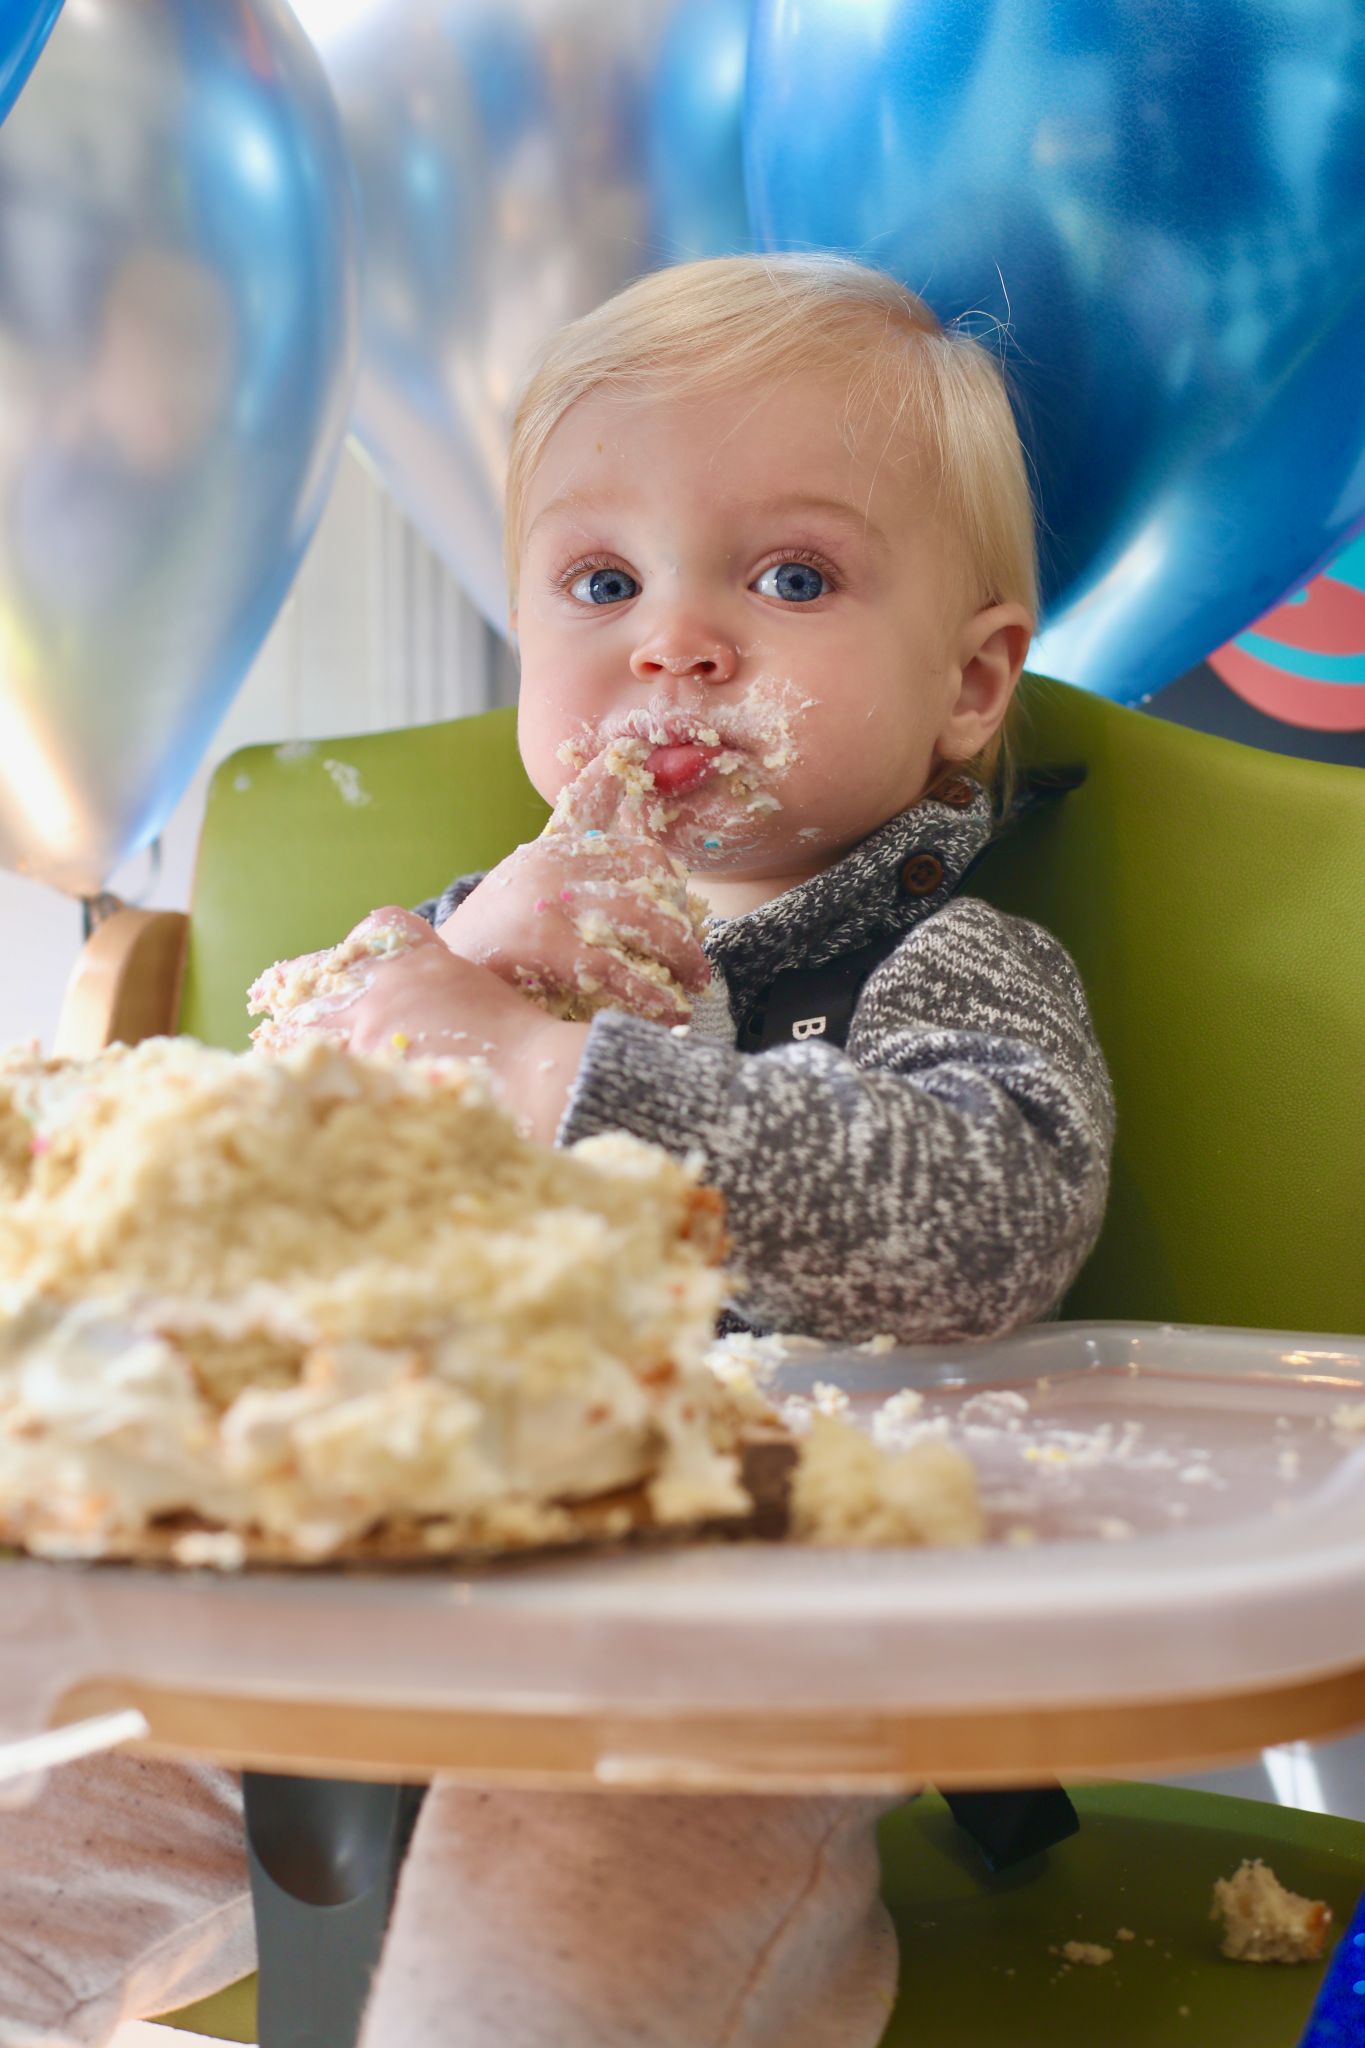 A baby with cake all over his face.